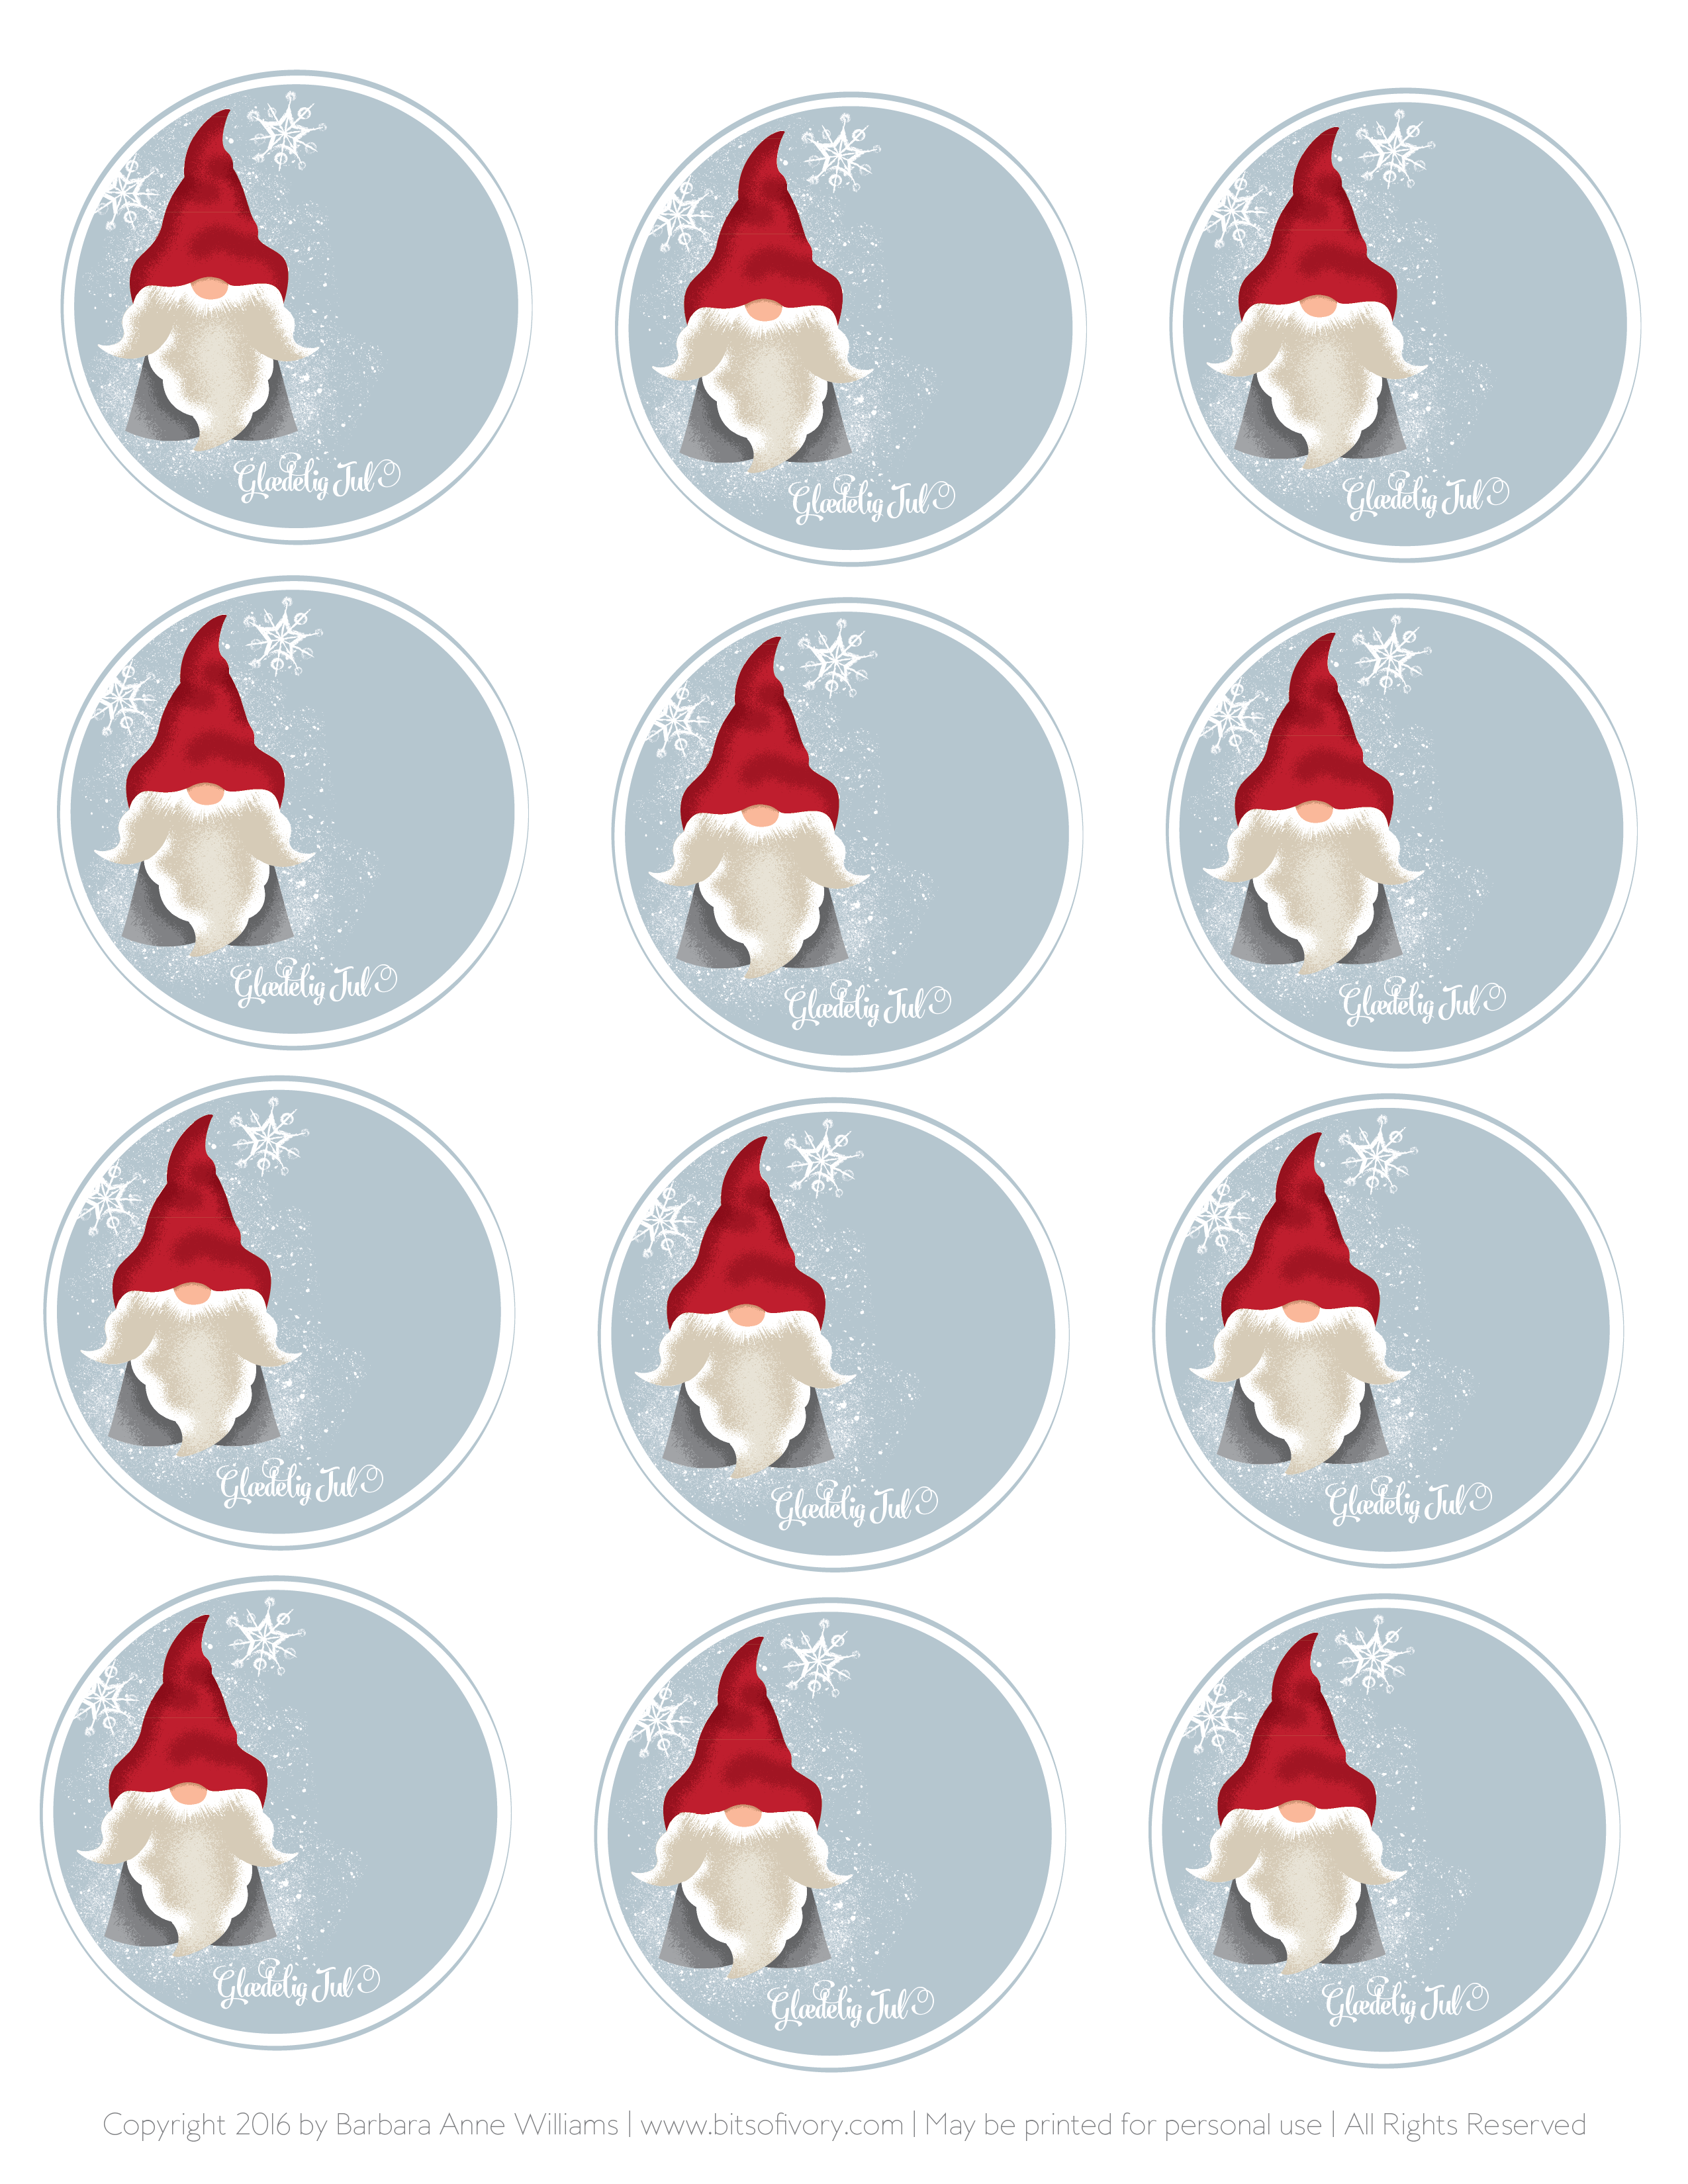 Printable Christmas Tags with Danish Nisse on snowy blue background from www.bitsofivory.com designed by Barbara Anne Williams